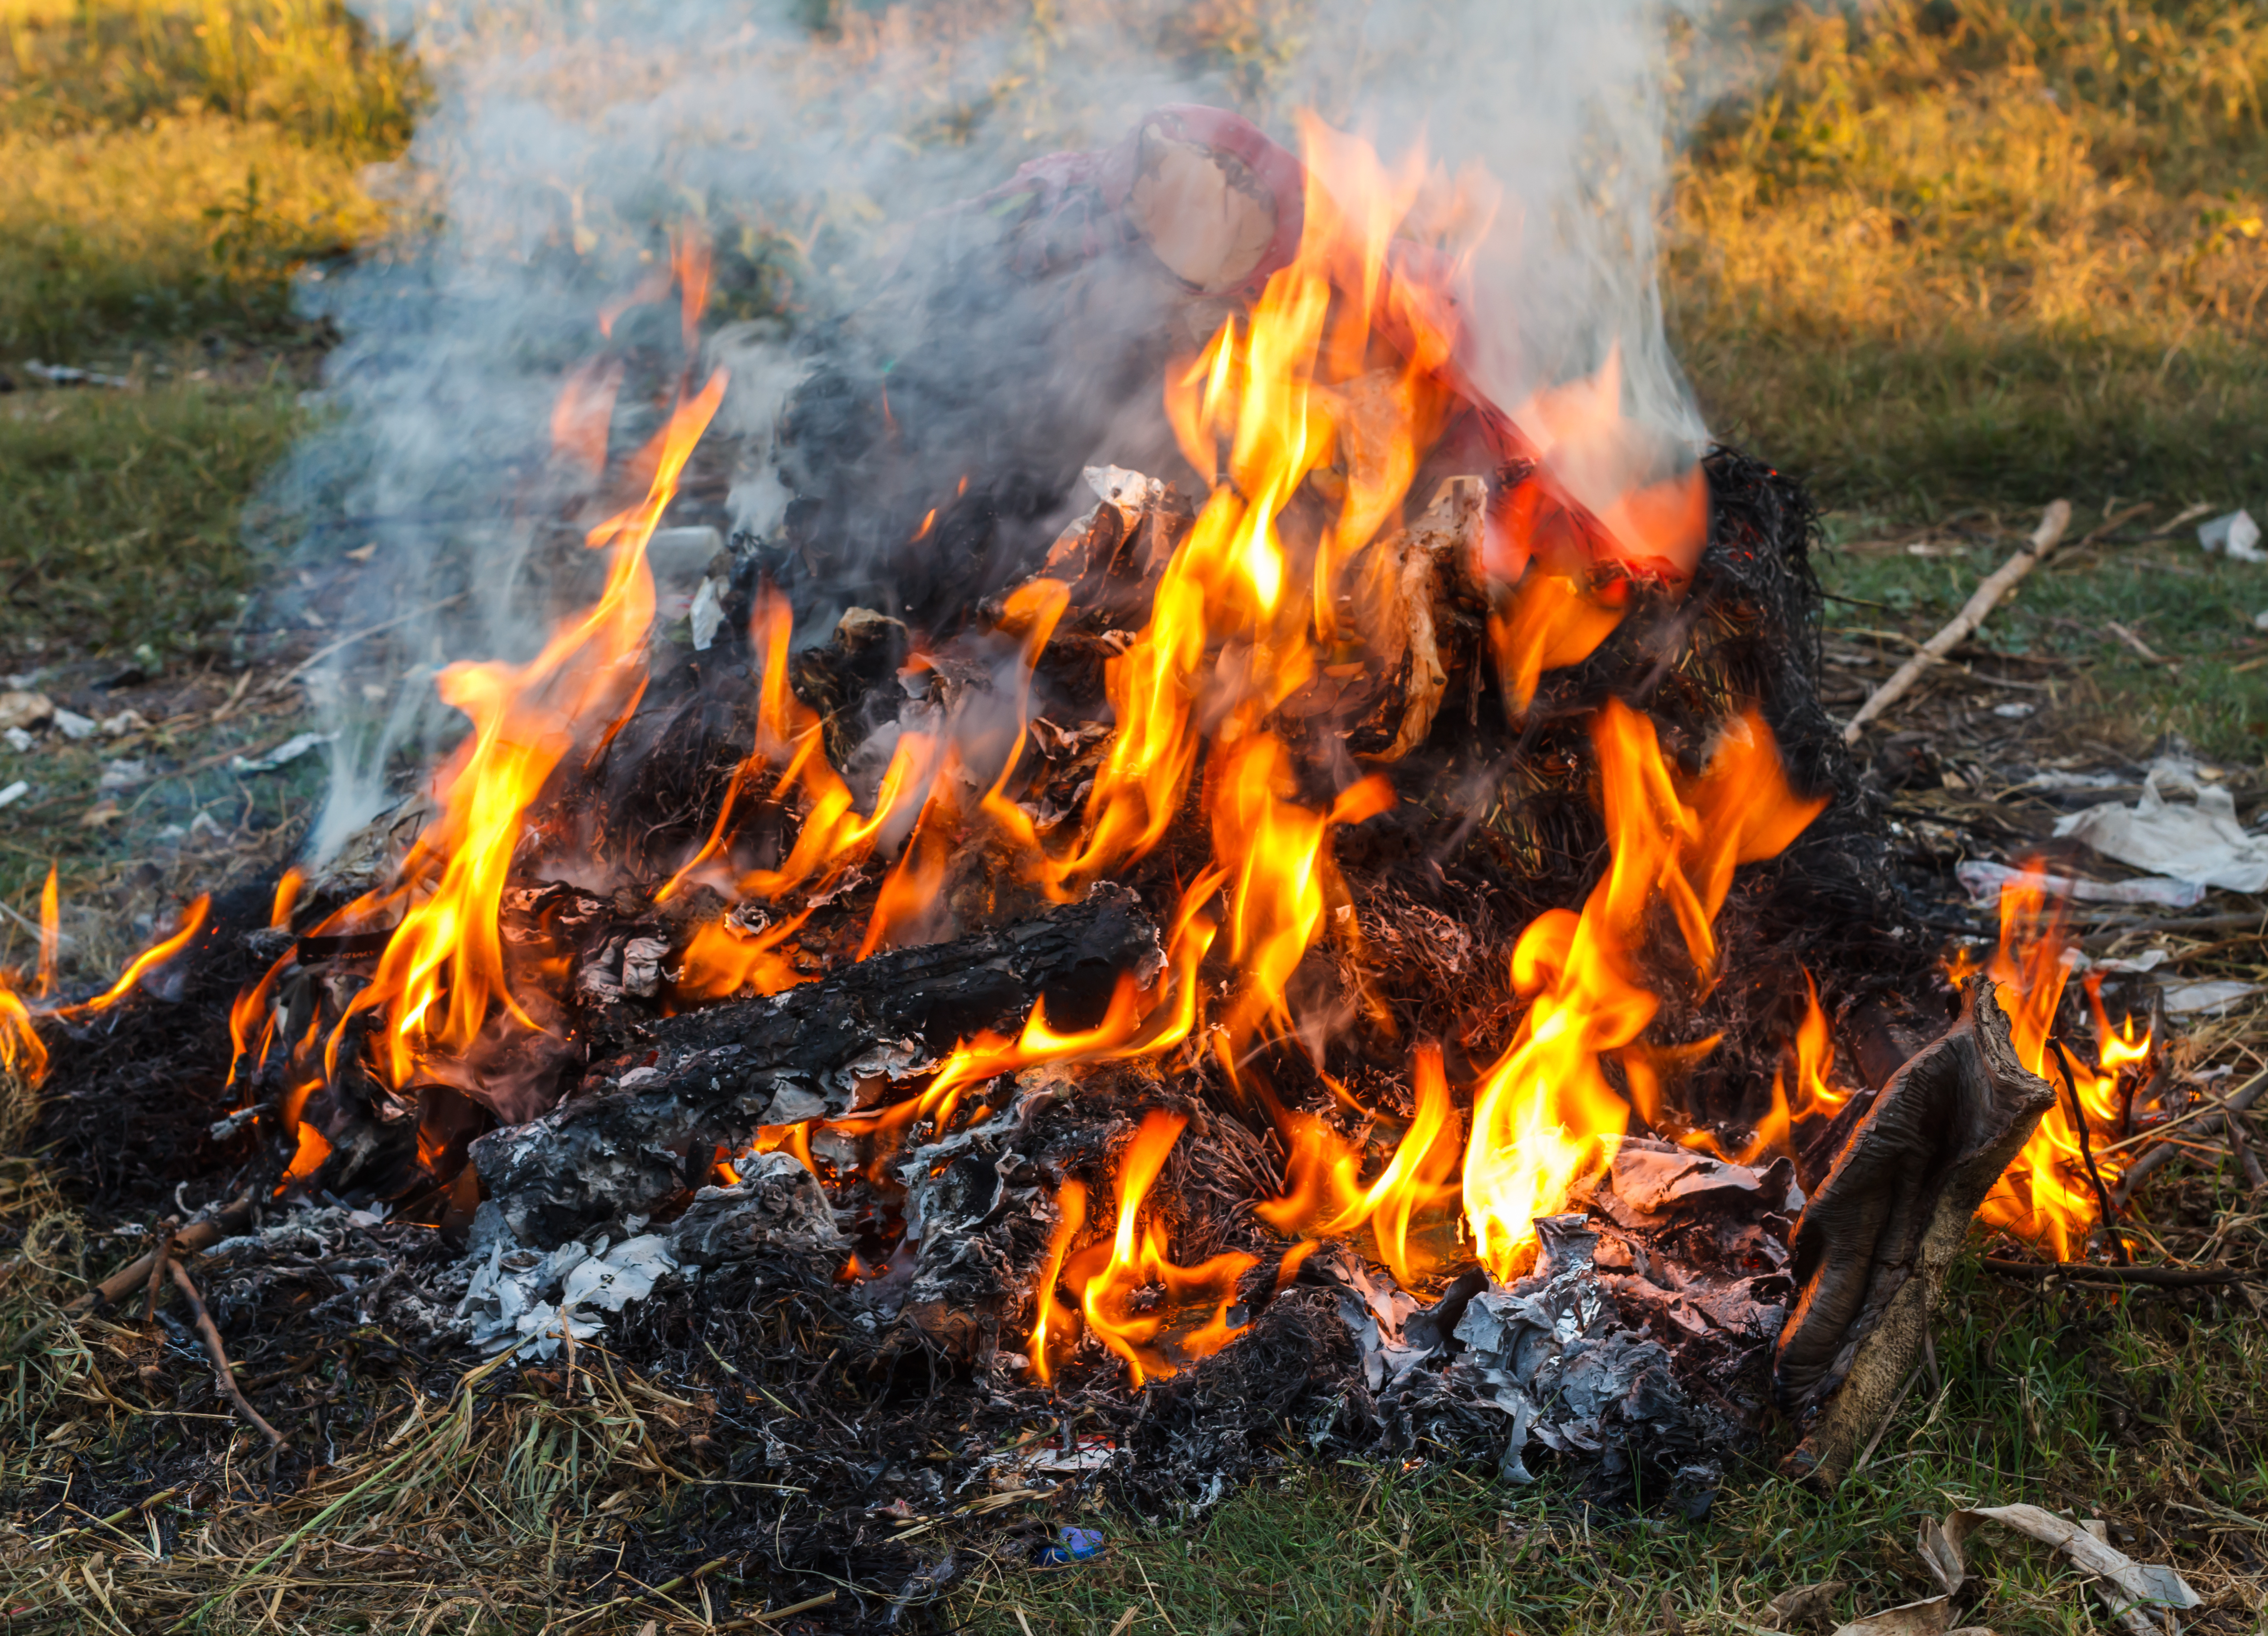 South Carolina Forestry Commission Issues Statewide Outdoor Burning Ban Effective Tomorrow, April 7